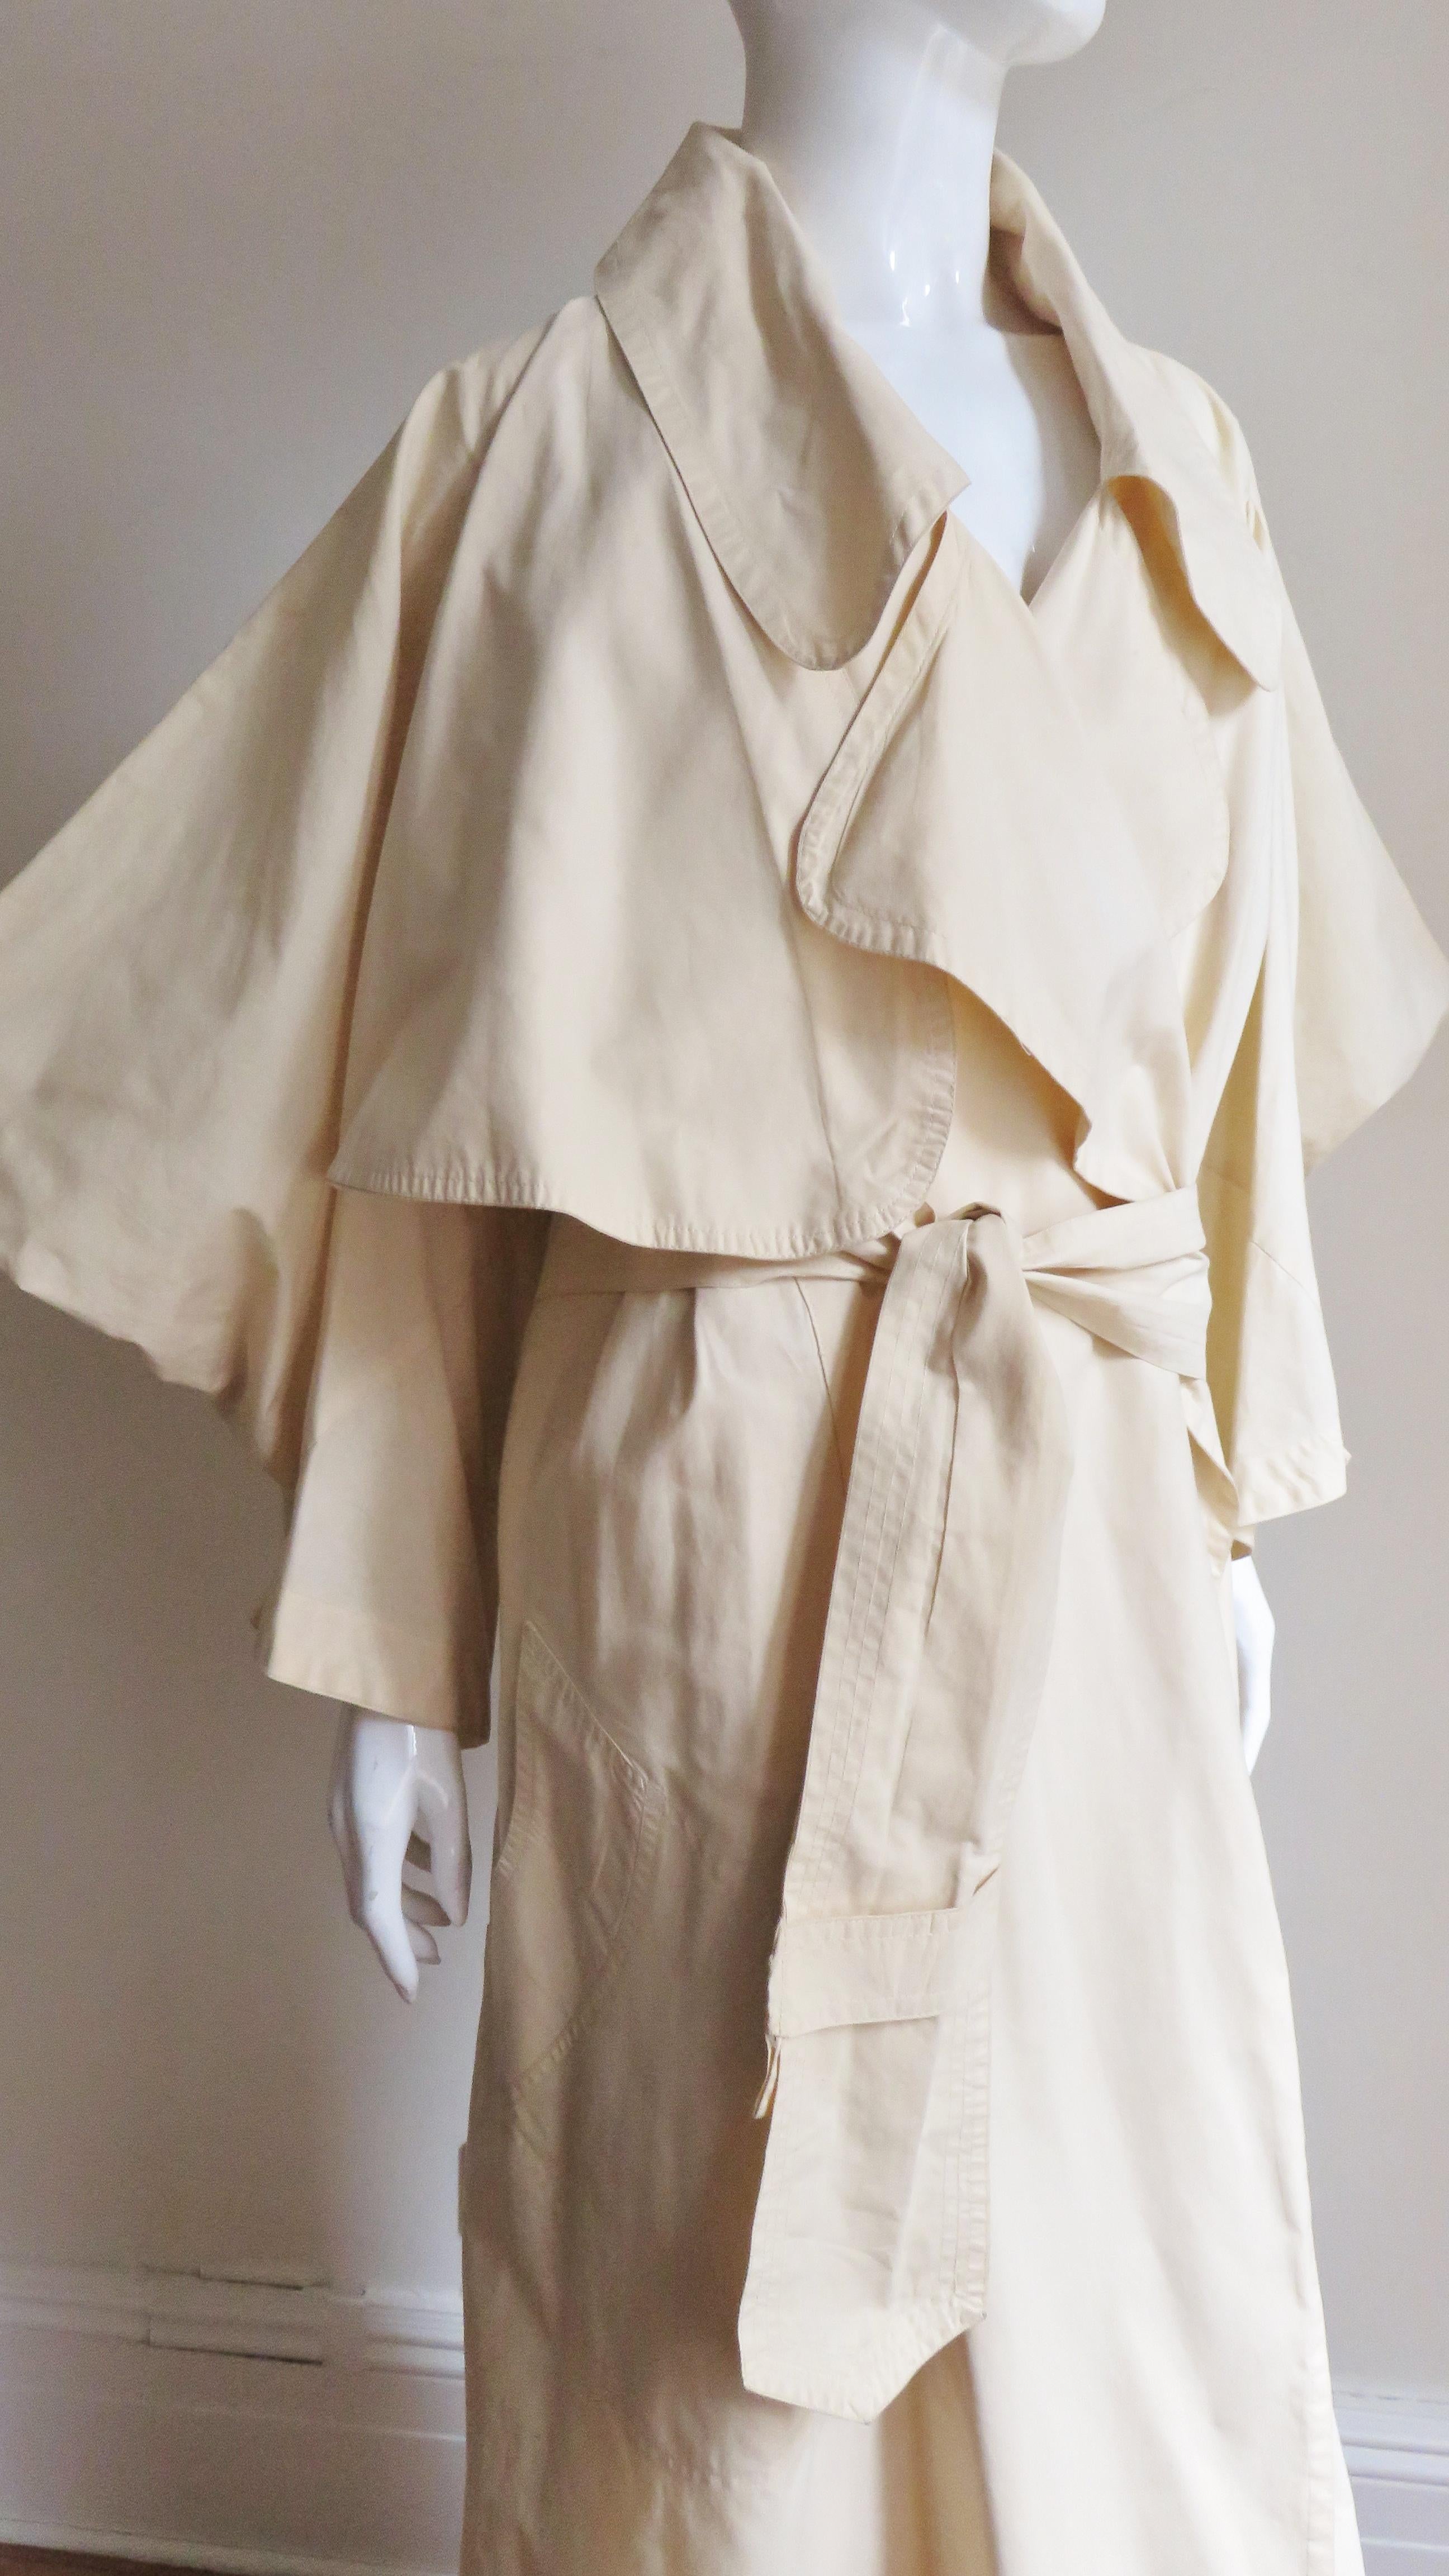 Women's Westwood and McLaren Worlds End Witches Collection AW 1983 Trench Coat